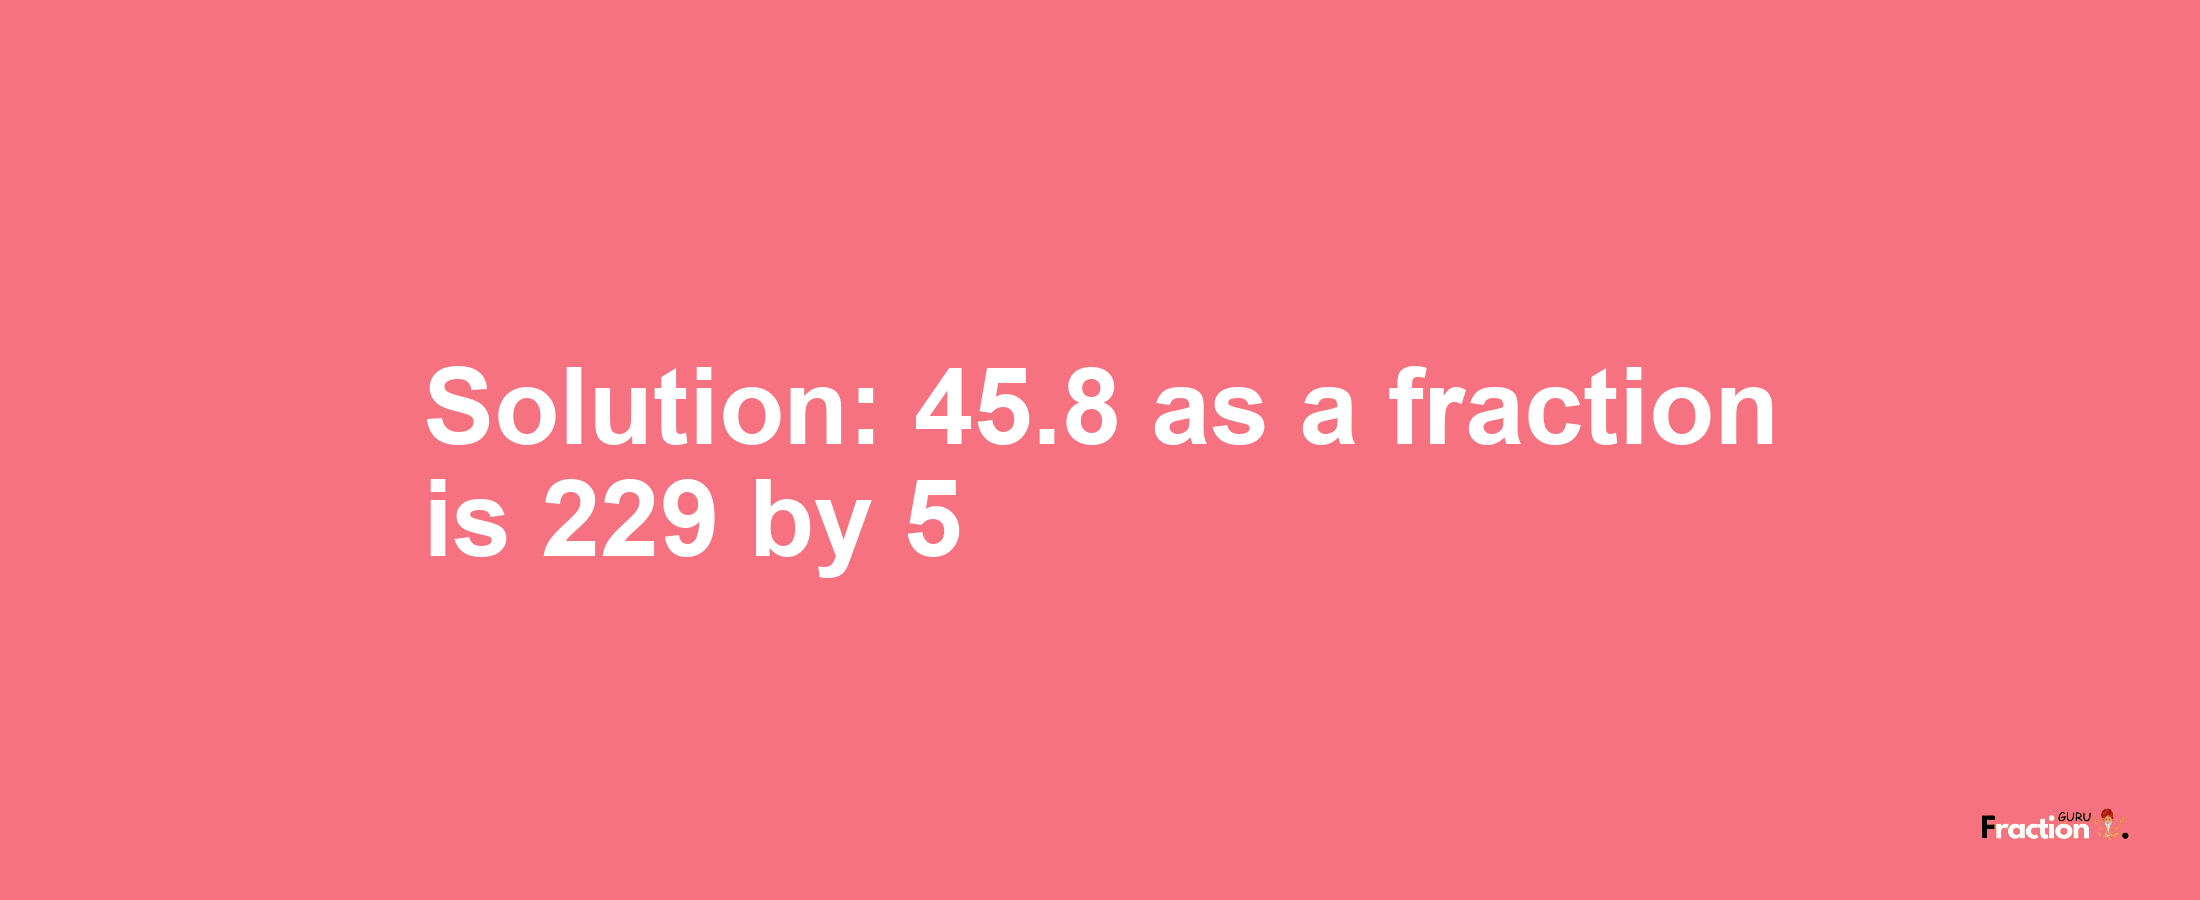 Solution:45.8 as a fraction is 229/5